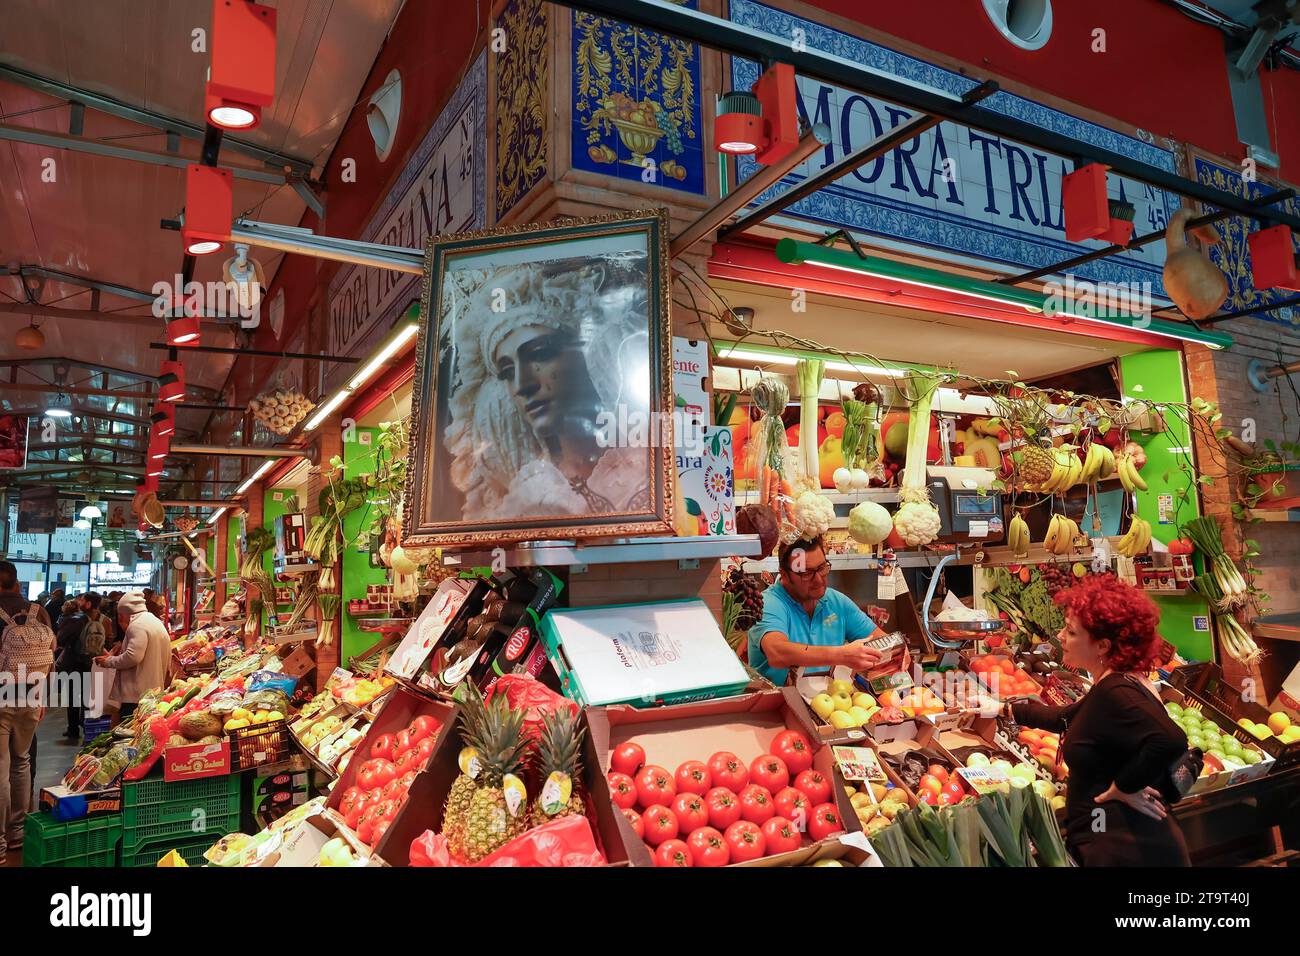 Fruit and vegetable stall in Triana market,Seville, Andalusia, Spain Stock Photo